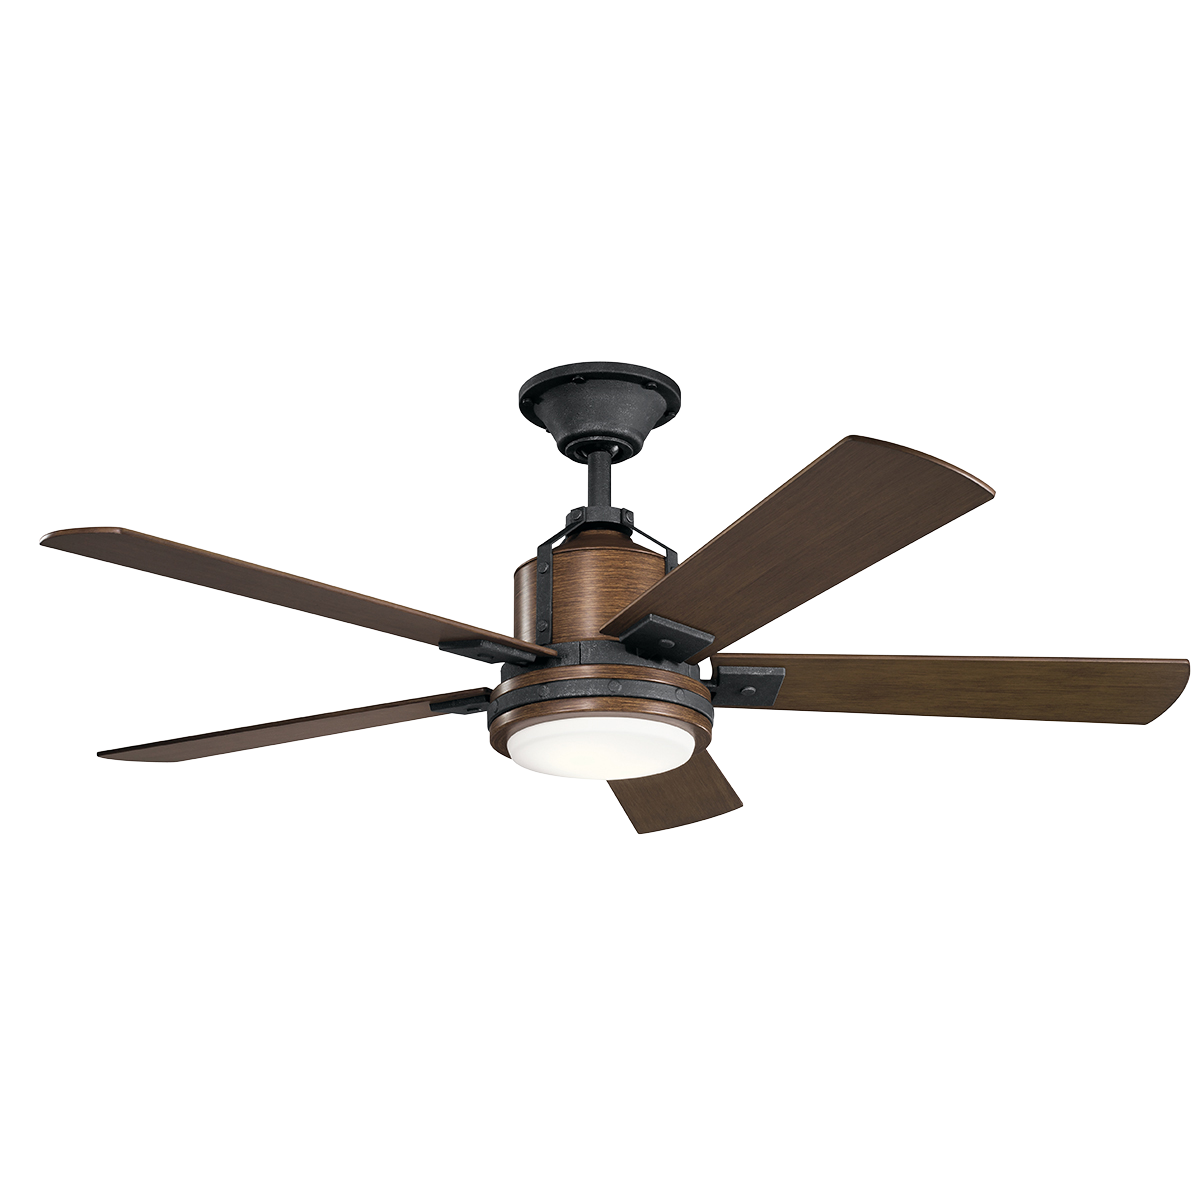 You'll love the flea market find-feel that this 52 inch Ceiling Fan from the Colerne(TM) collection brings to your space. The Auburn Stain on all 5 blades creates the look of a wooden box up cycled into something that'sat home in both a rustic lodge or a New York loft. The vintage industrial design comes to life with a Distressed Black finish on the metal accents.